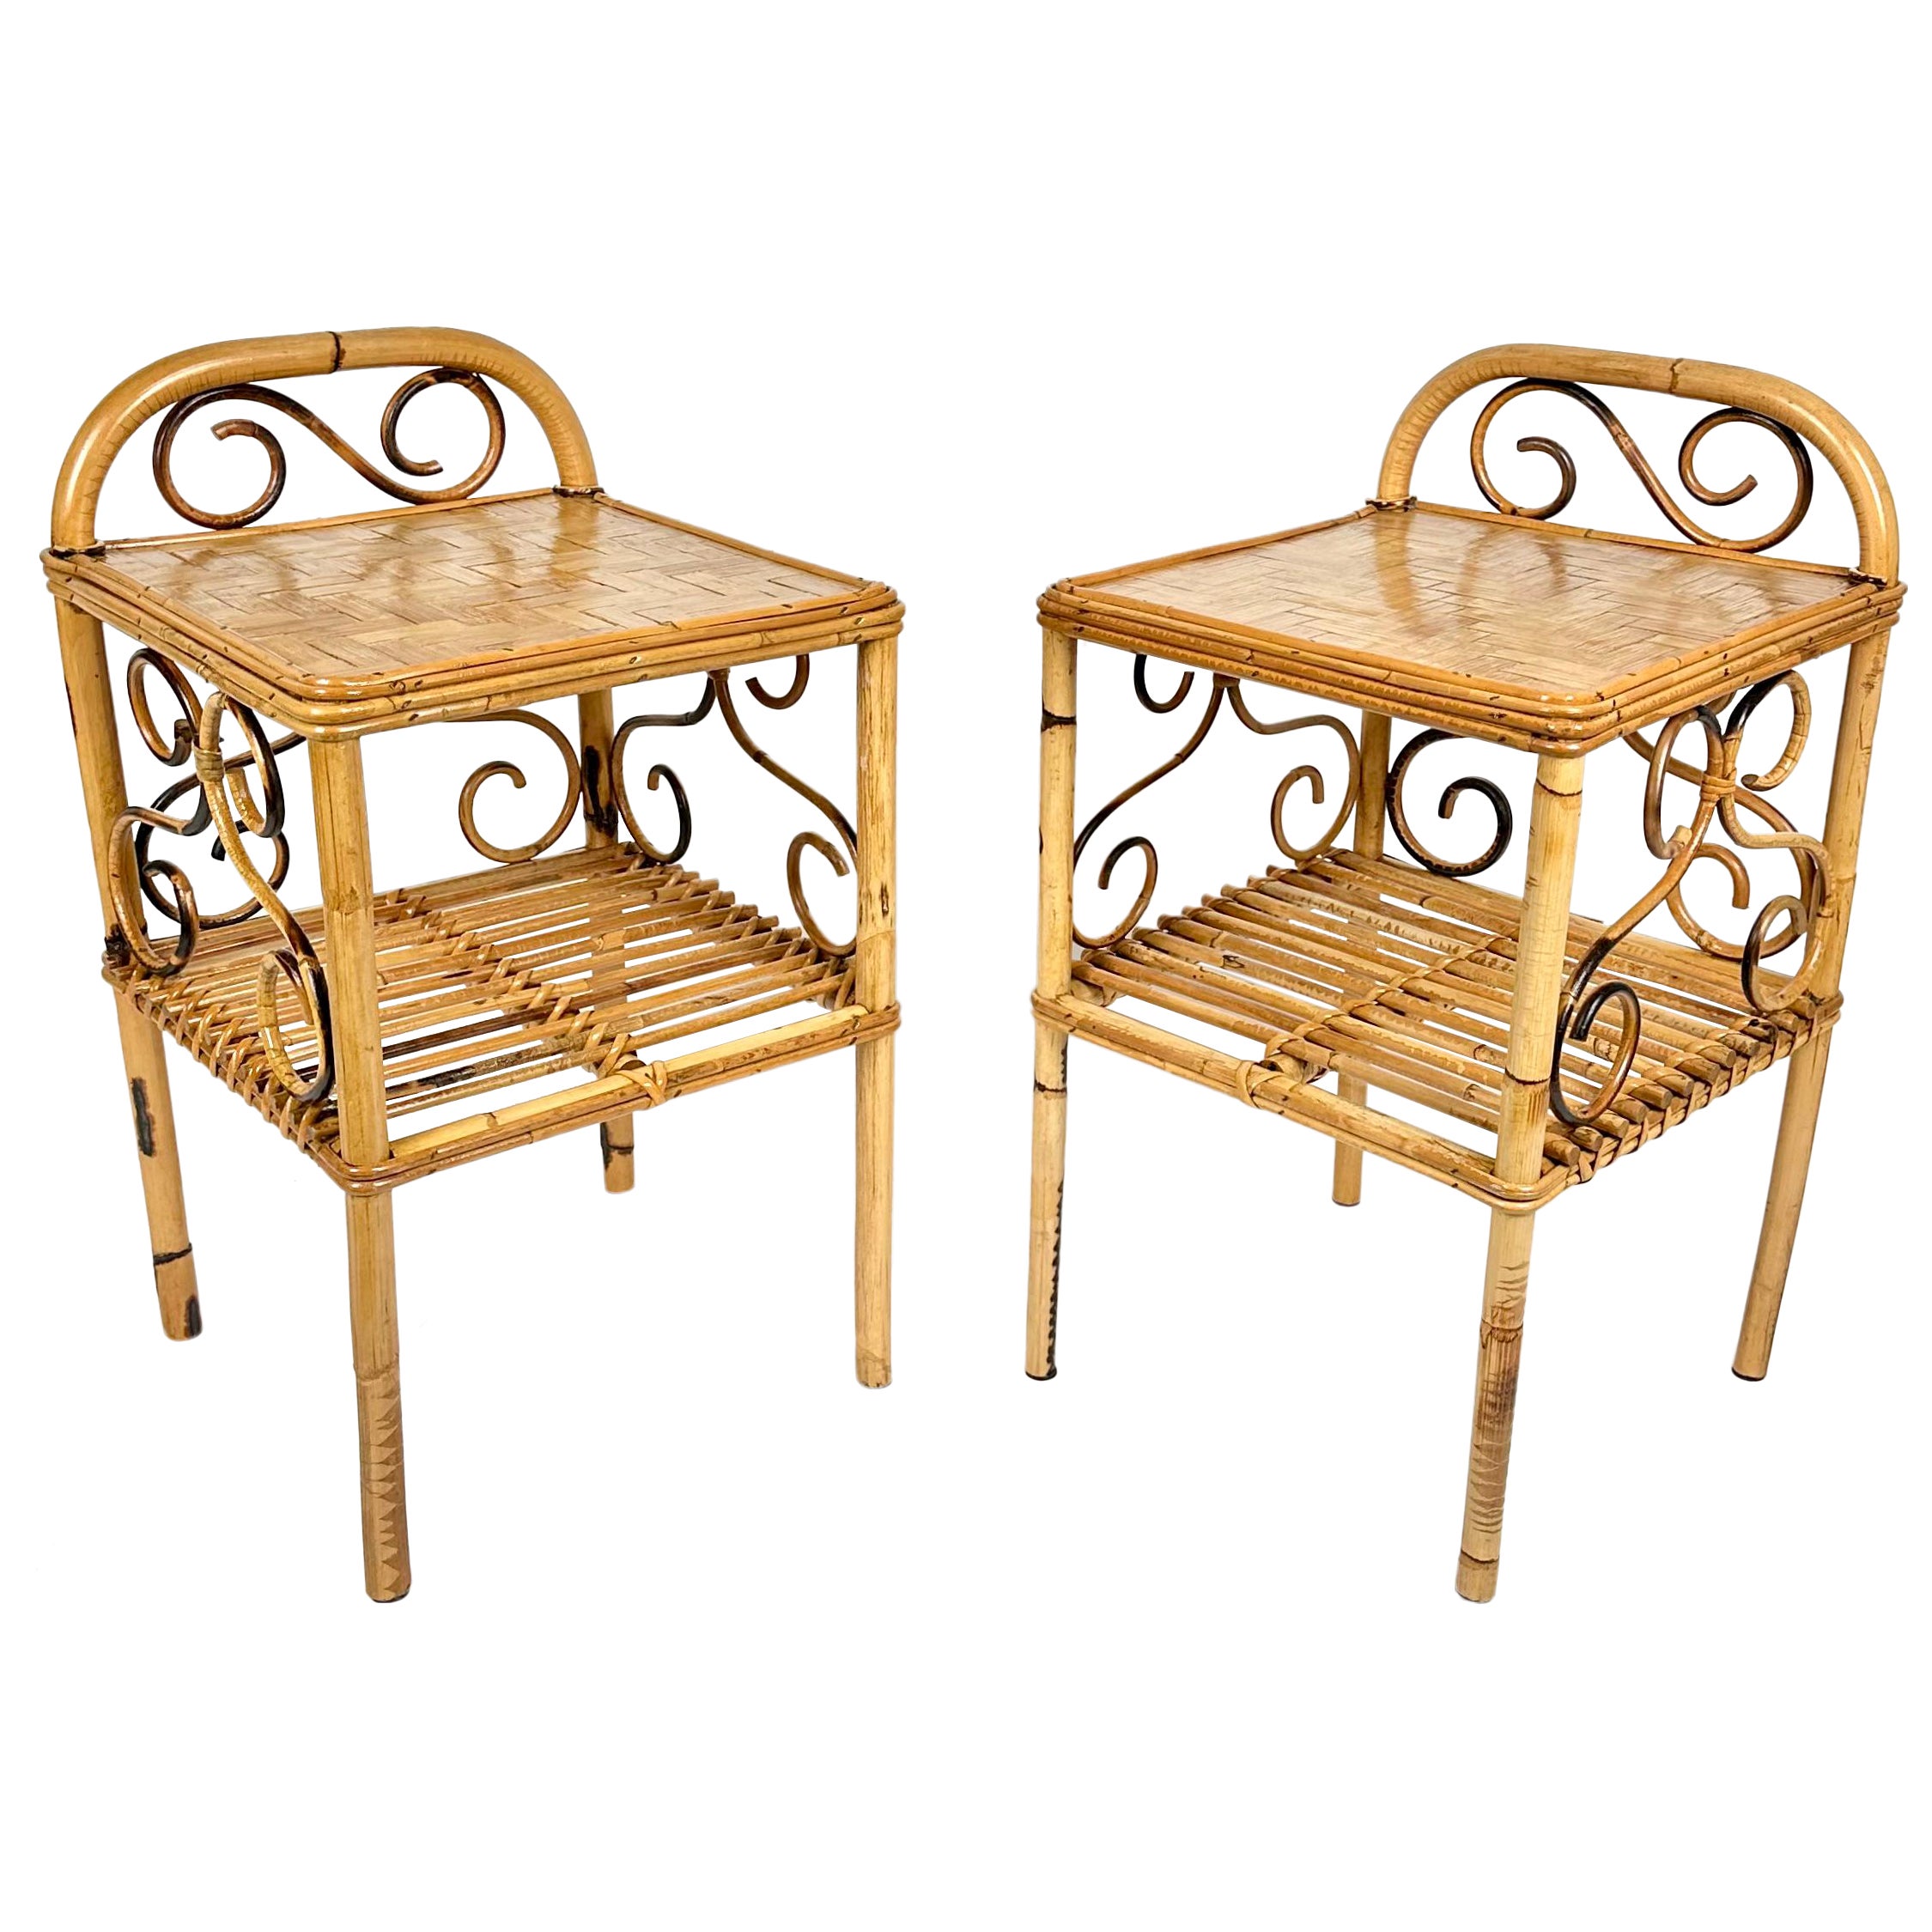 Midcentury Pair of Bedside Tables Nightstands in Bamboo and Rattan, Italy, 1960s